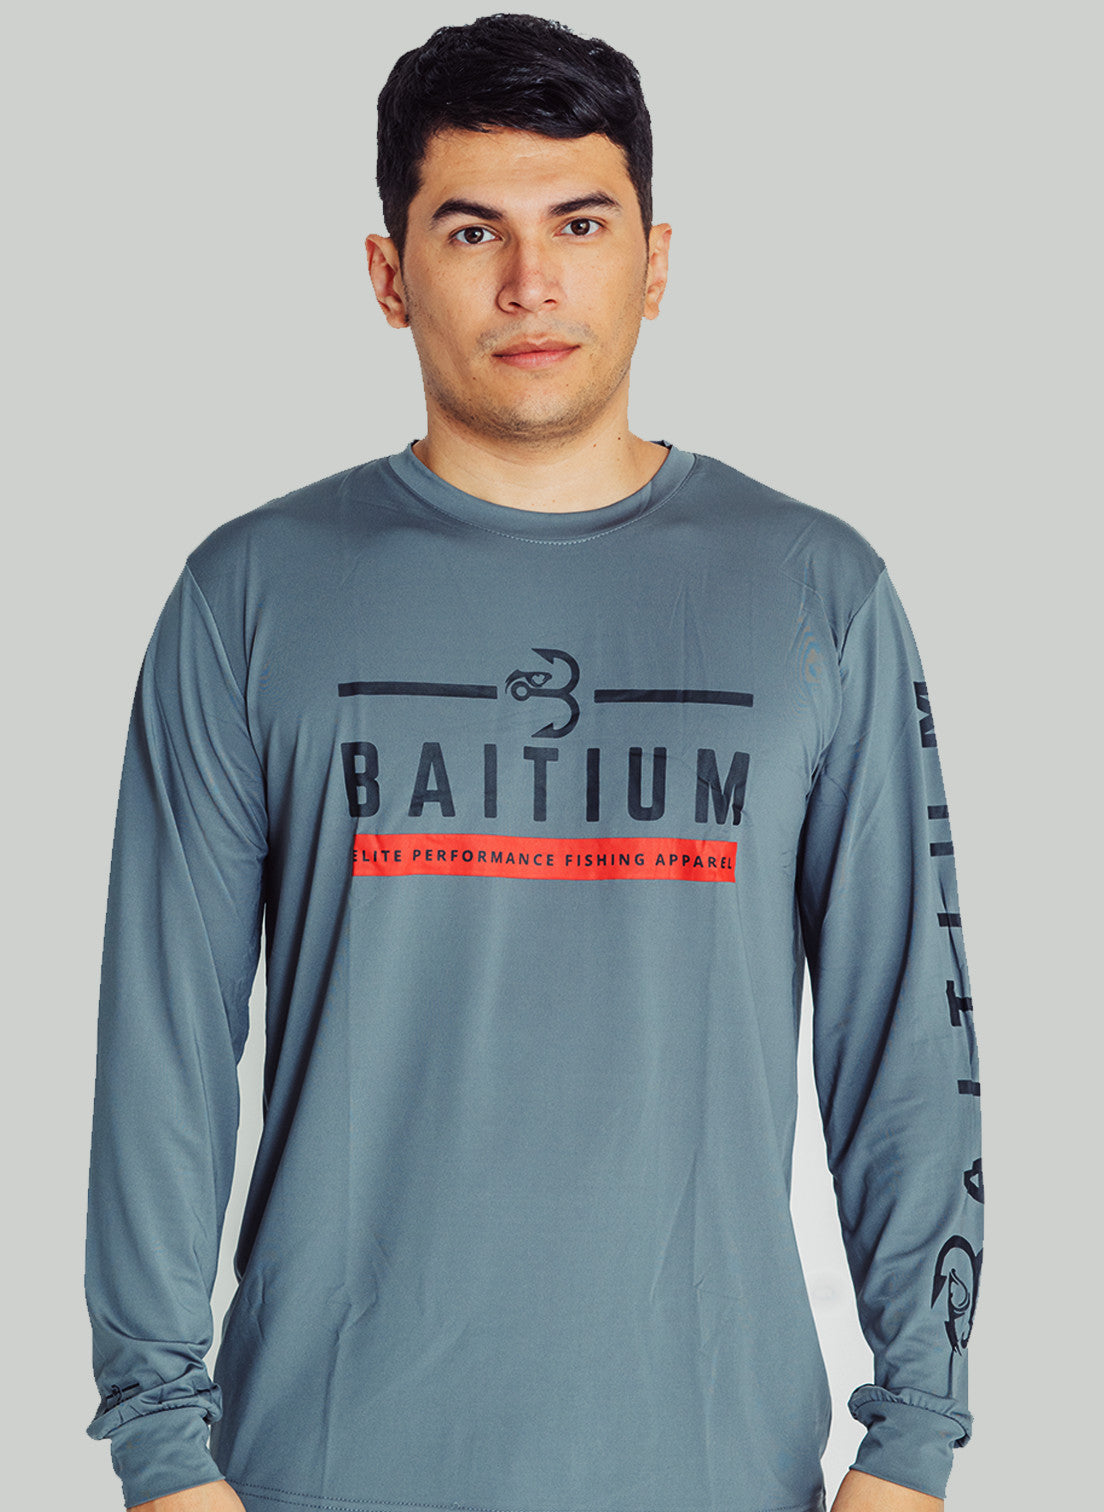 90 Miles South  UPF 50+ Fishing Shirts featuring cuban heritage